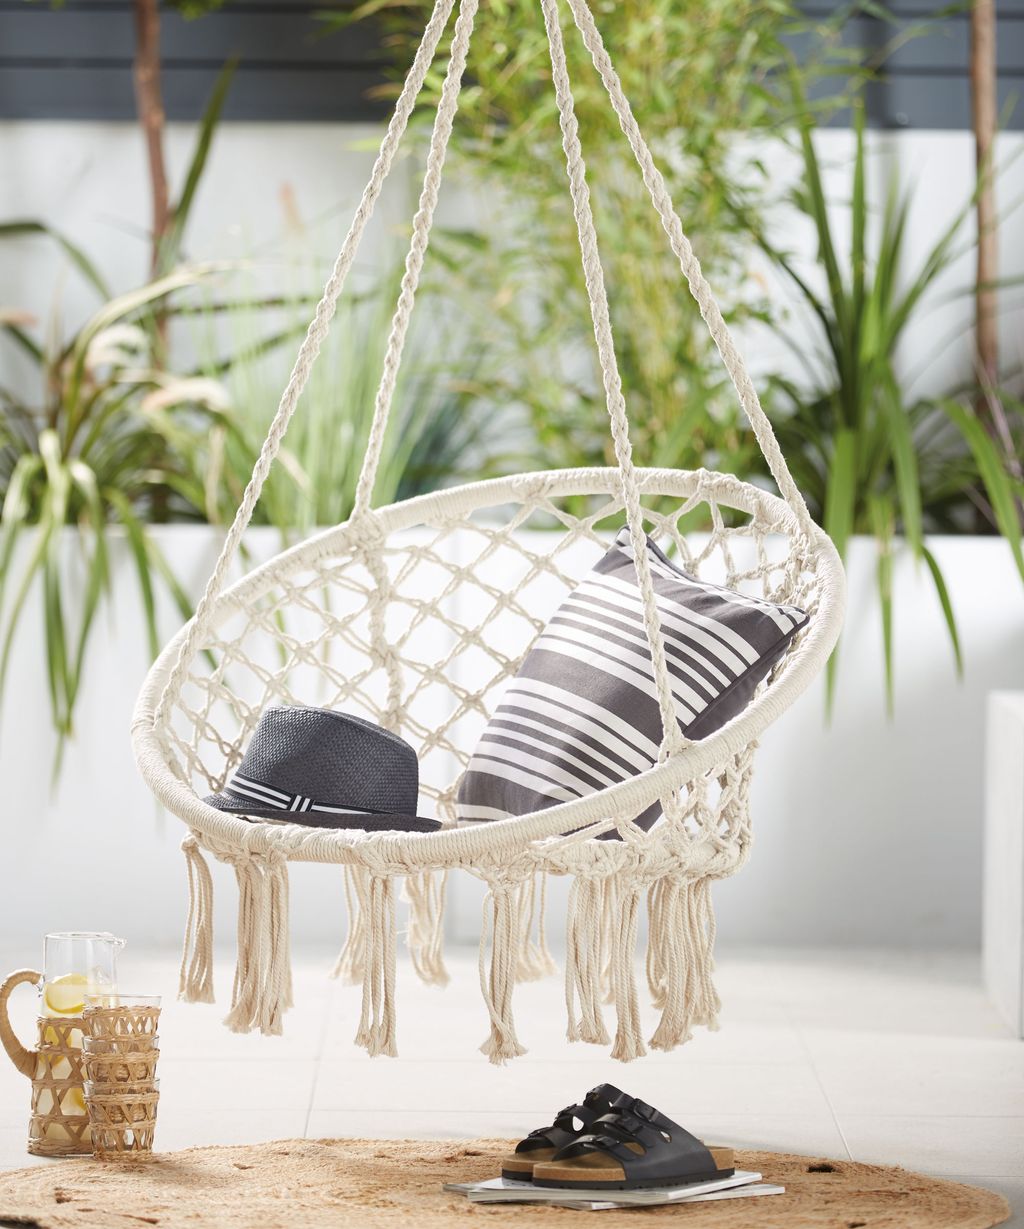 Aldi's boho hanging chair is the perfect Wayfair dupe at 39.99 Real